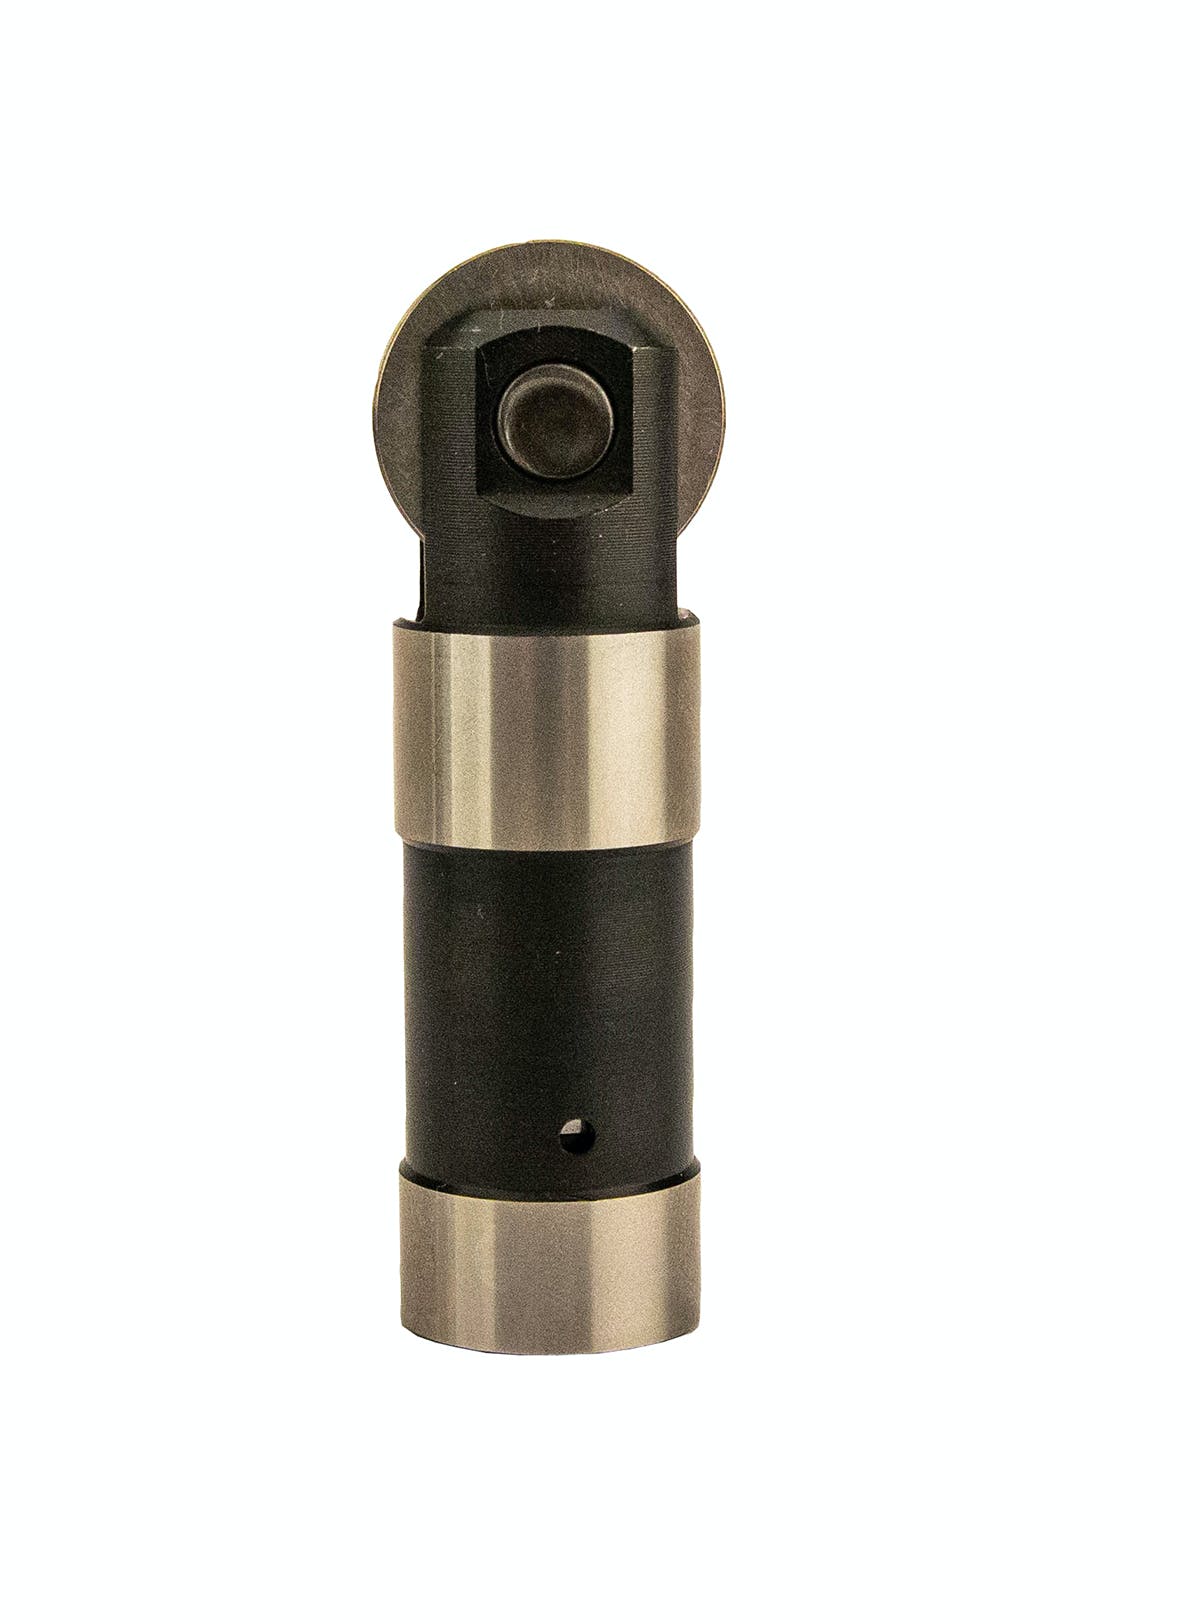 Competition Cams 7390-4 Harley Evo Forged Hydraulic Roller Lifters